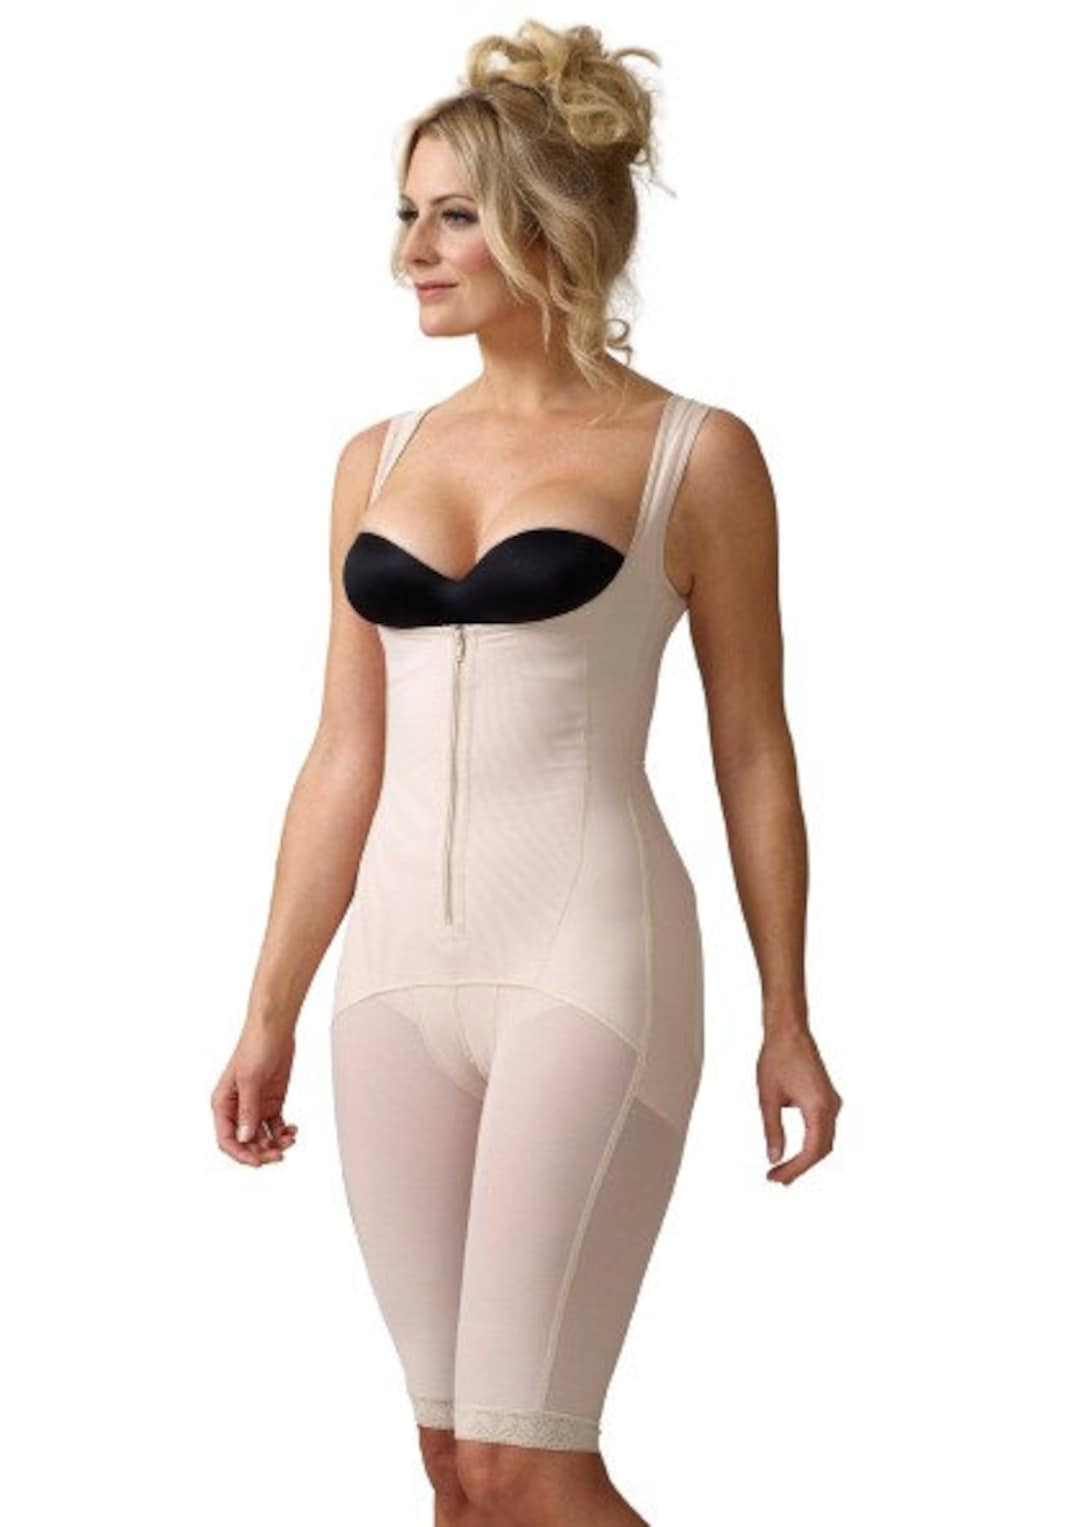 Colombian Strapless Butt Lifting Shapewear Bodysuit Girdle Powernet  Slimming New